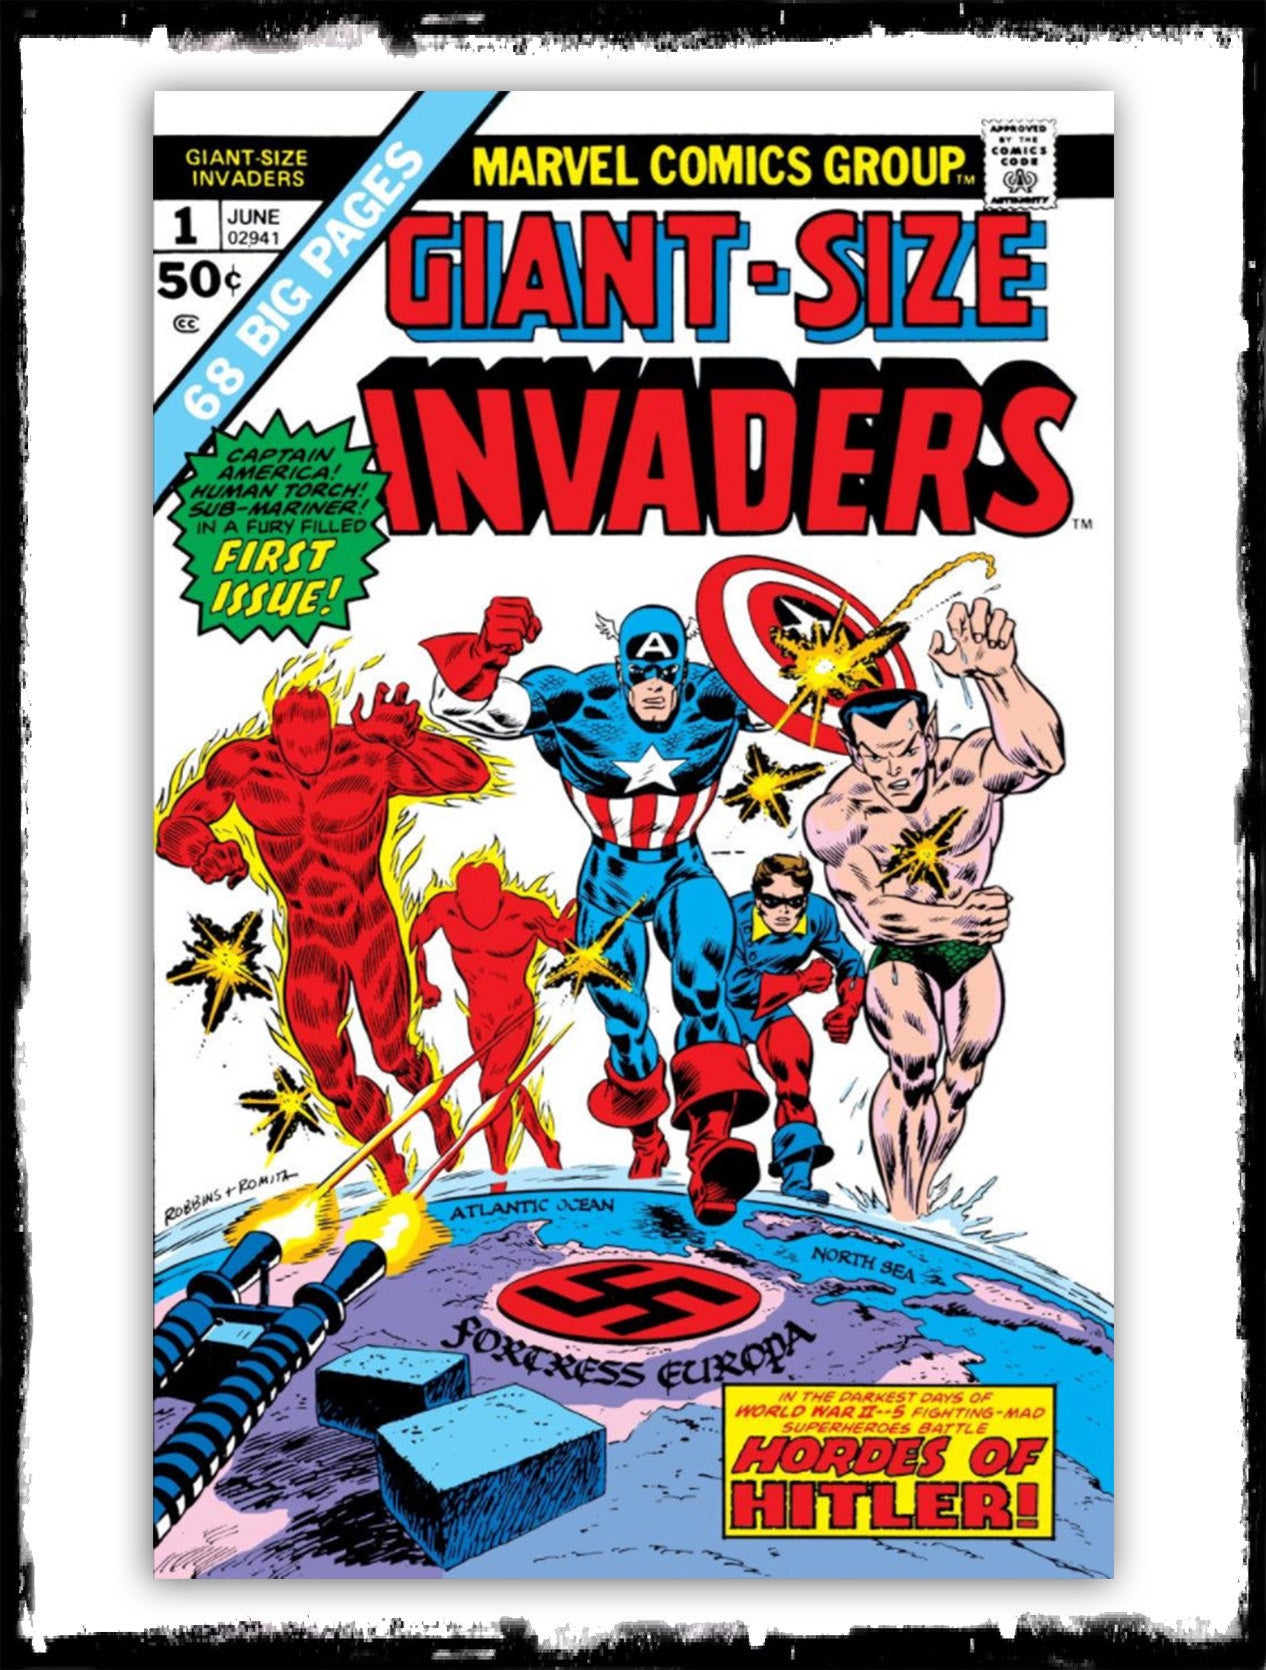 GIANT-SIZE INVADERS - #1 MARVEL CLASSIC (1975 - VF)